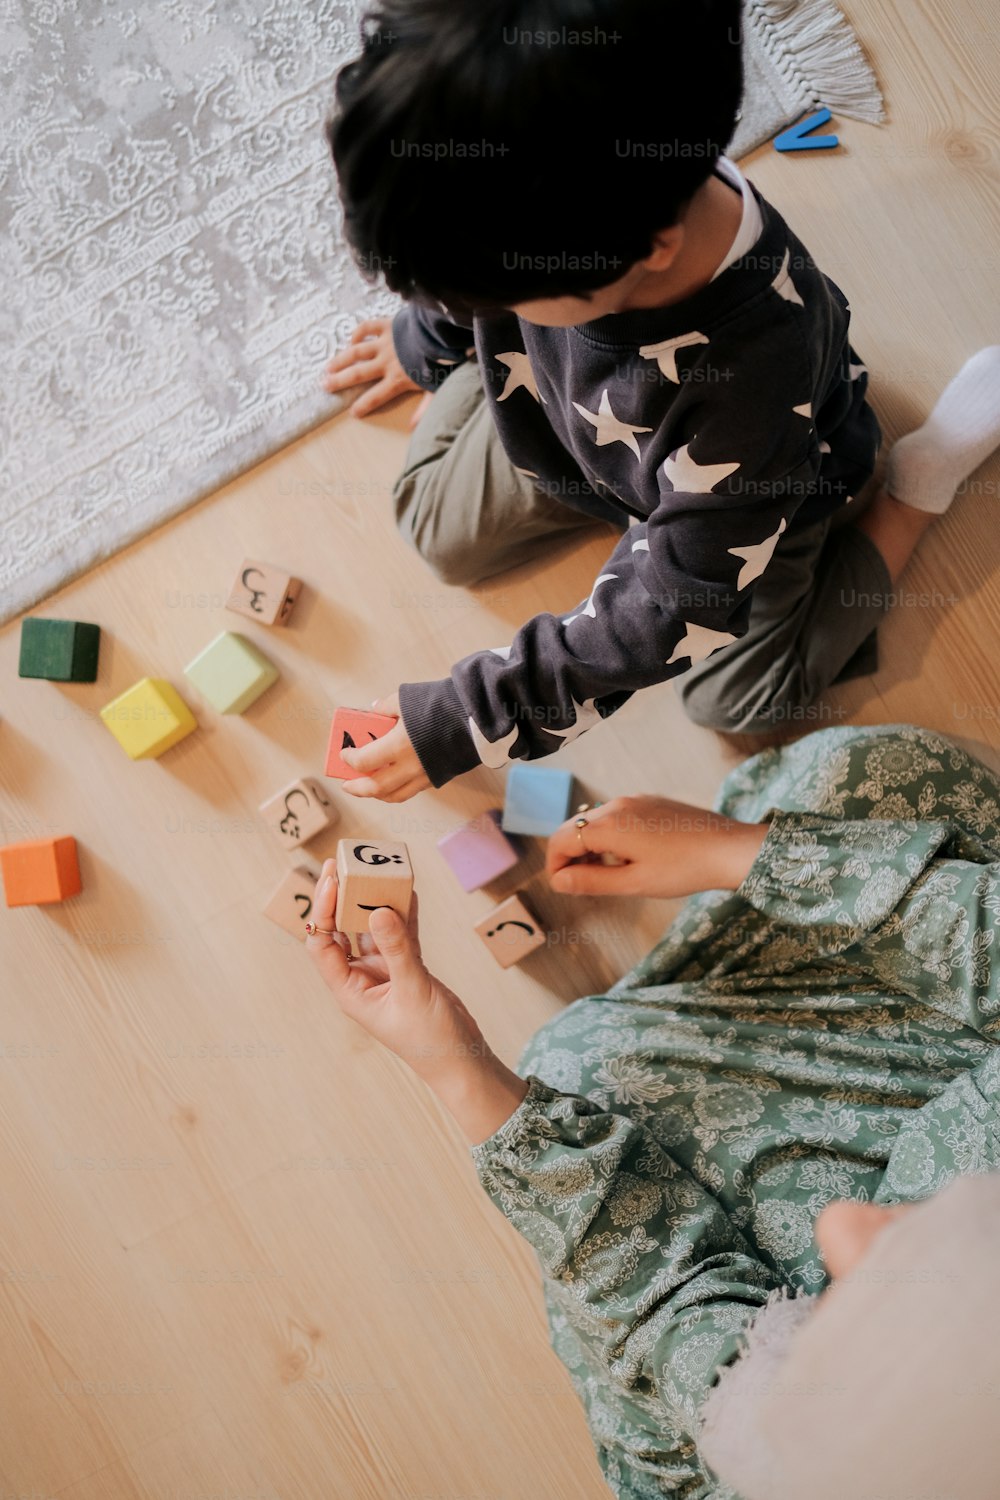 a young boy playing with wooden blocks on the floor